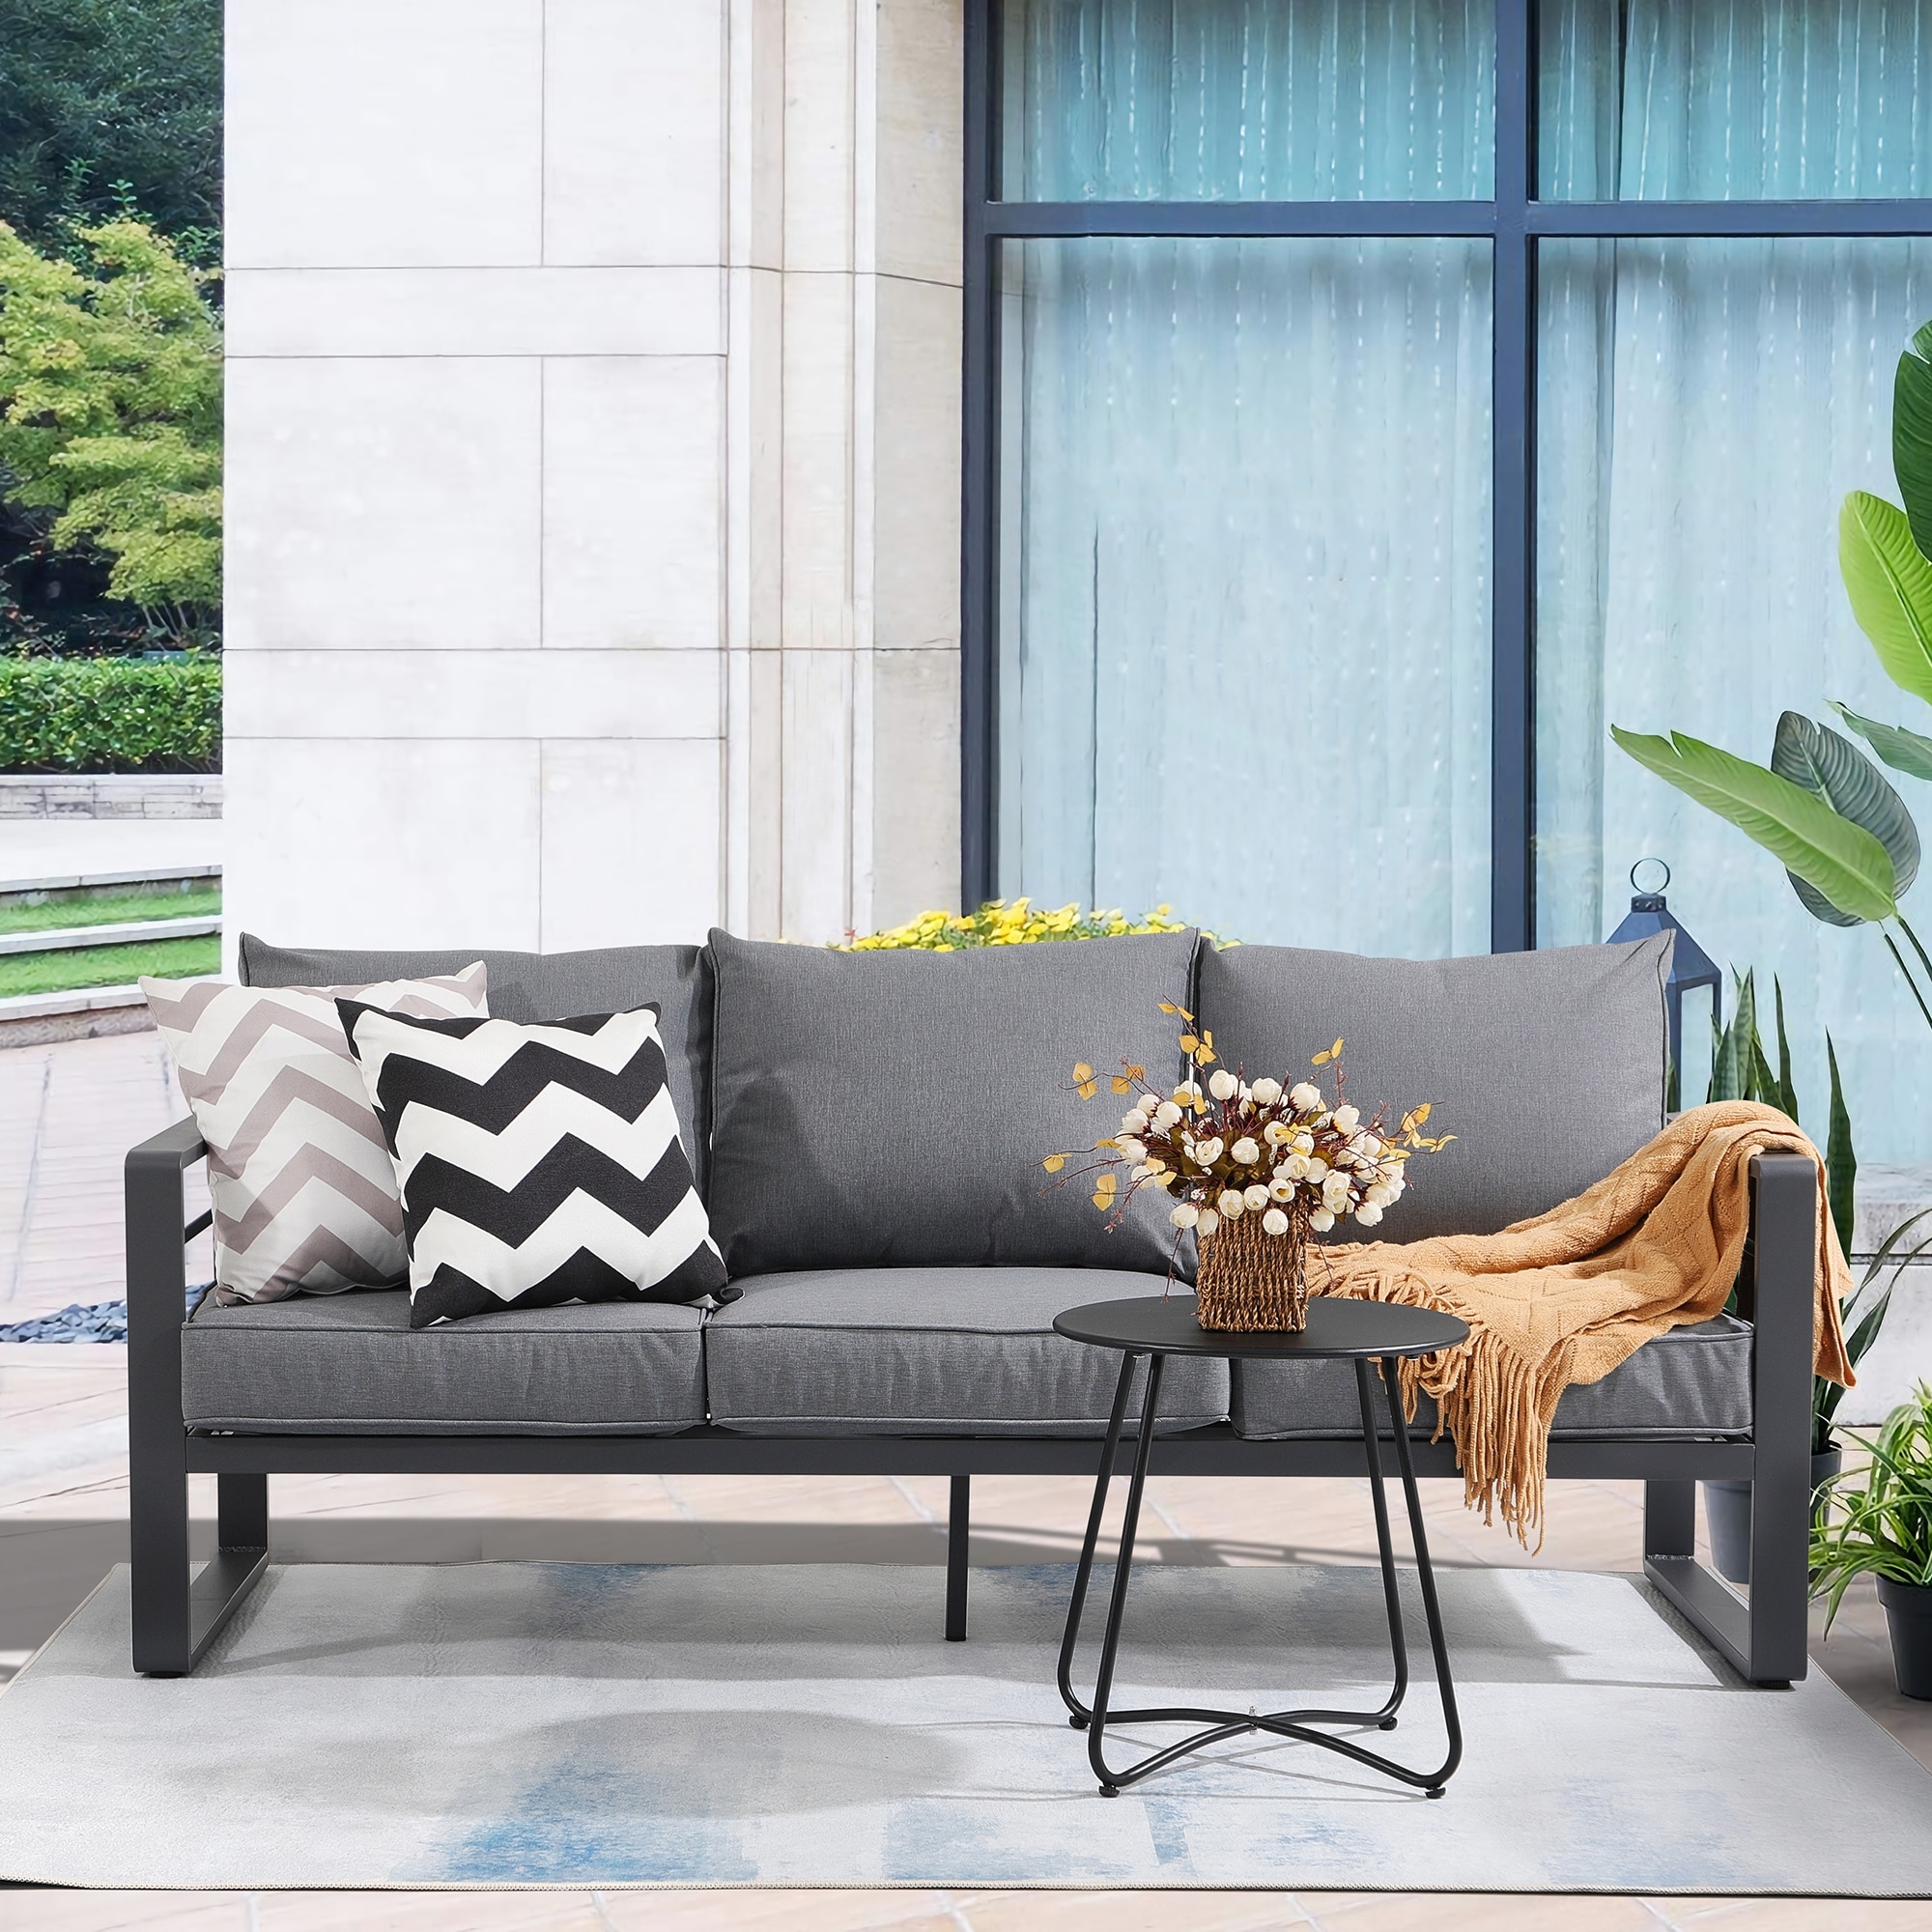 New Heights Huxley Woven Rope Outdoor Loveseat - Bed Bath & Beyond